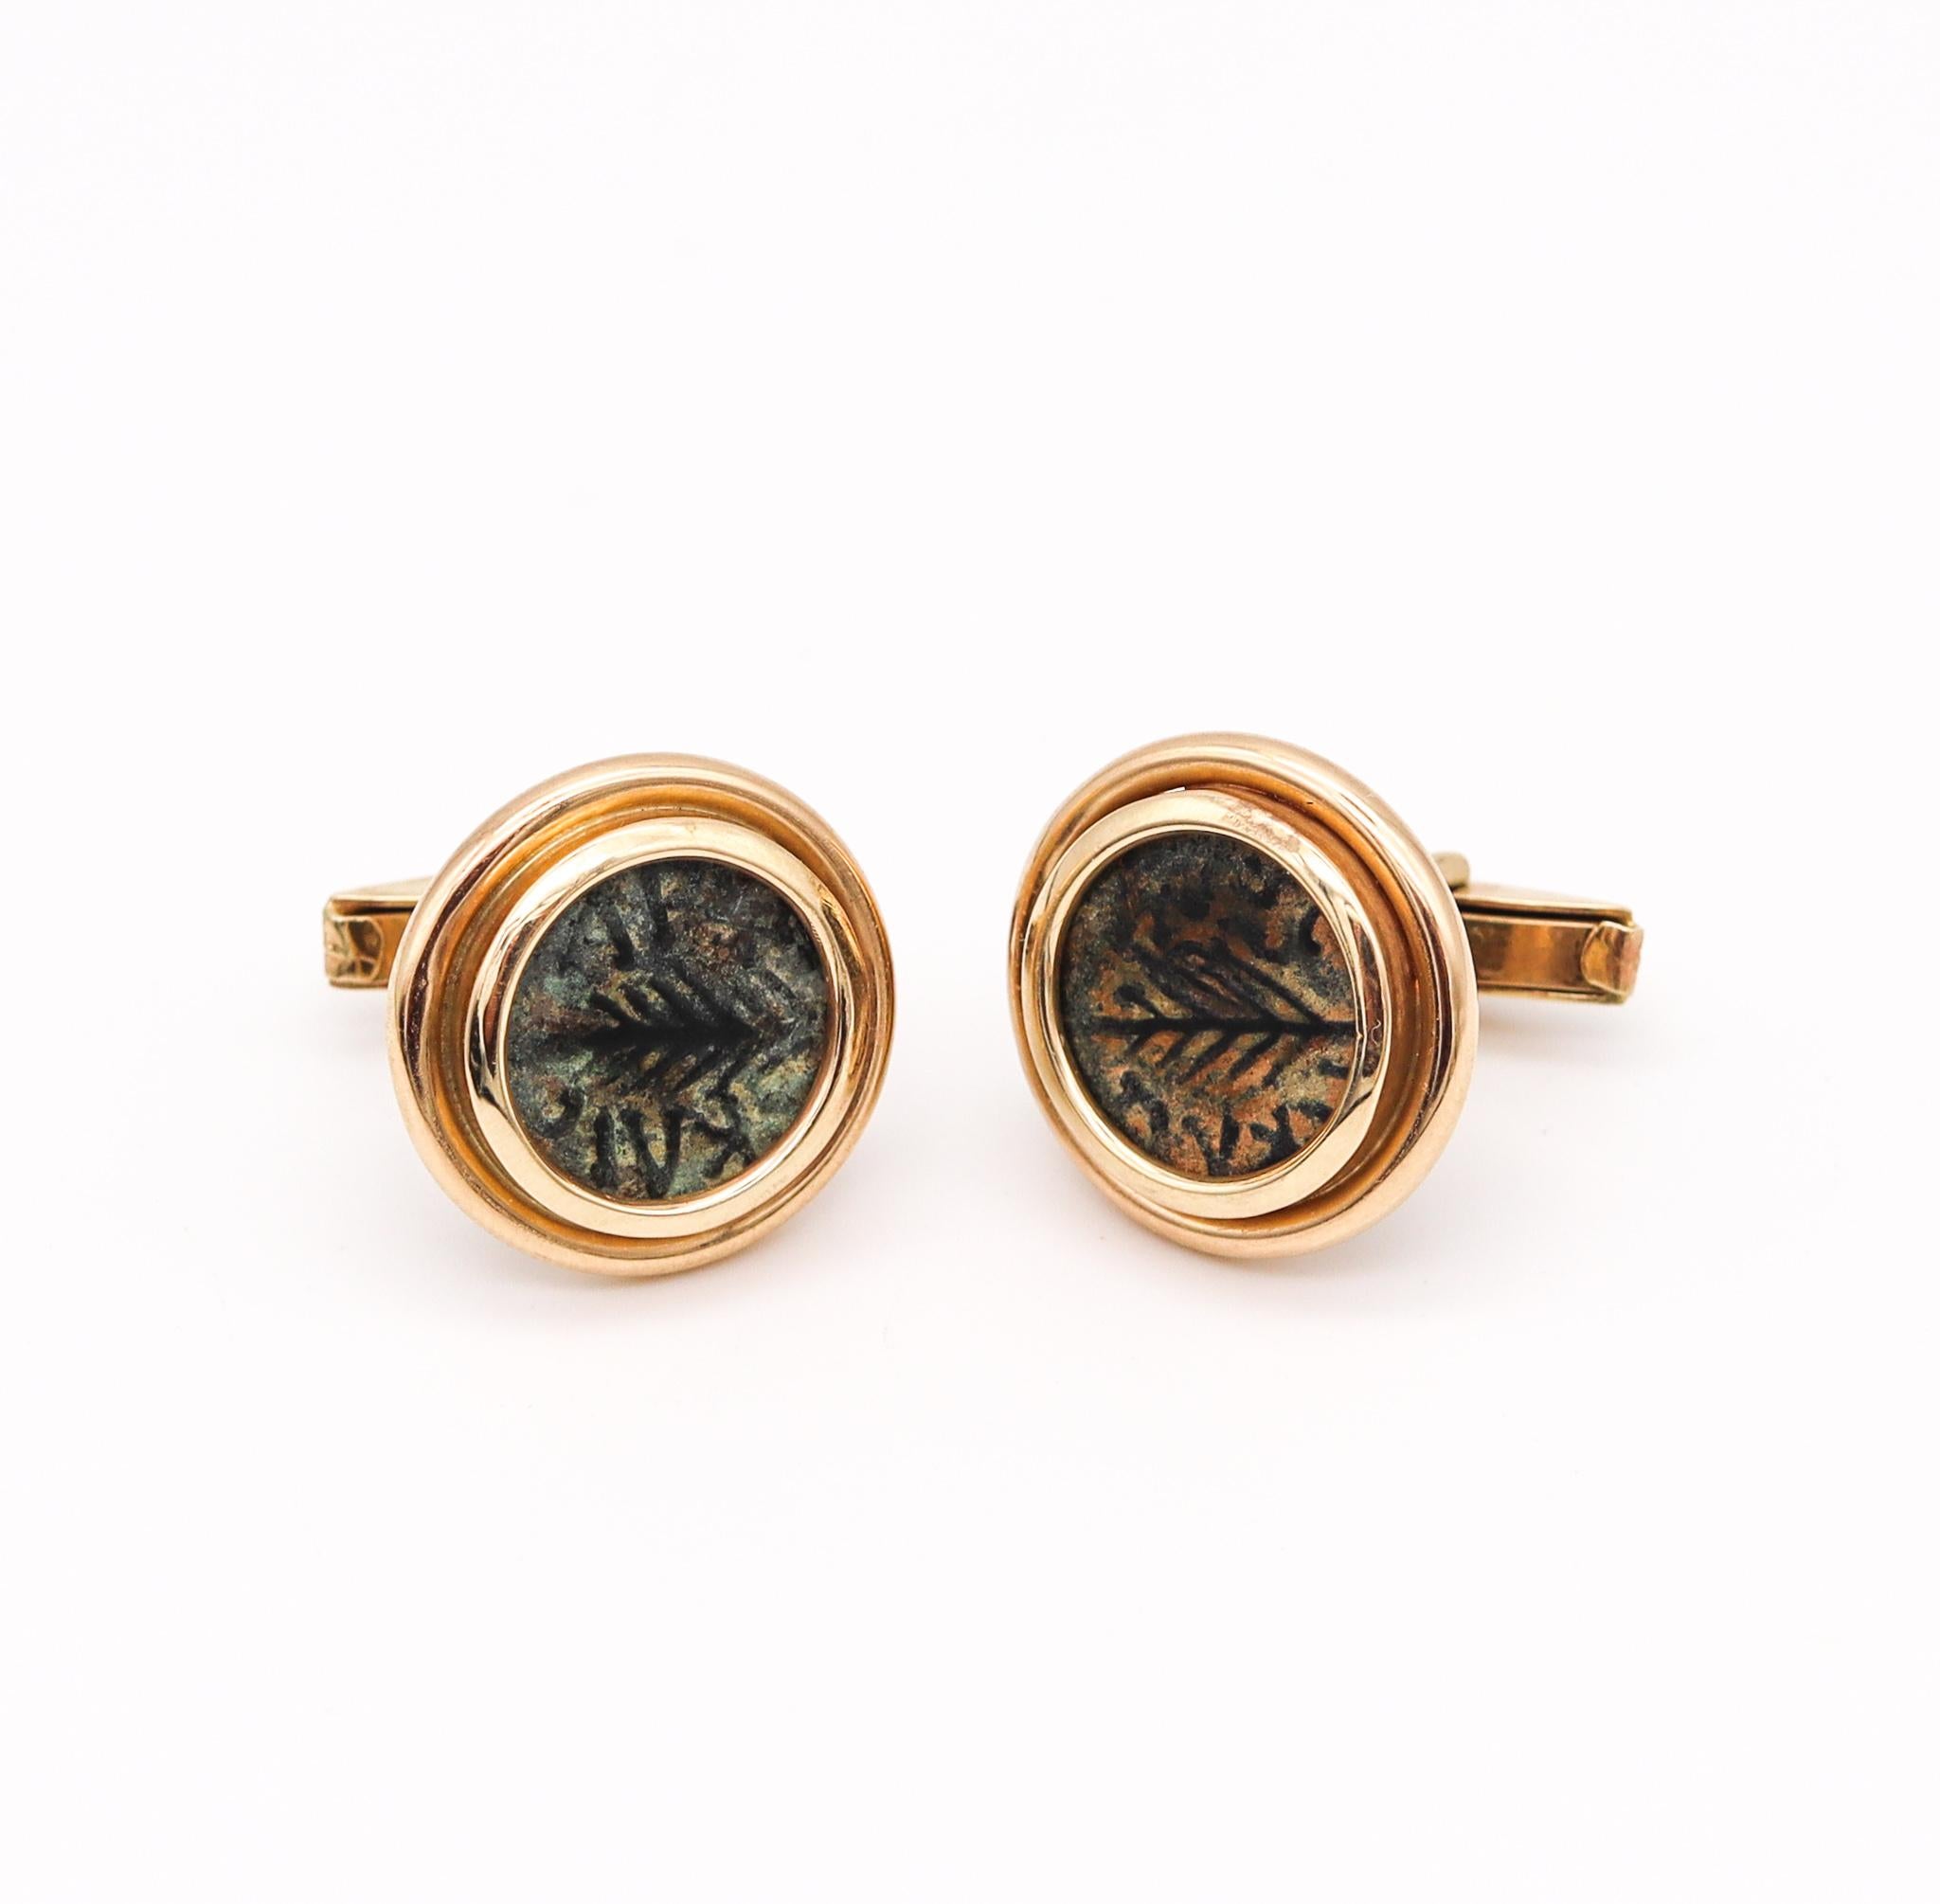 Cufflinks with ancient Roman coins from Judaea.

Great pair of rare ancient Judean (Jerusalem) coins minted during the period of the Roman Empire administration. These bronze coins were called Prutah and were minted in the city of Jerusalem around